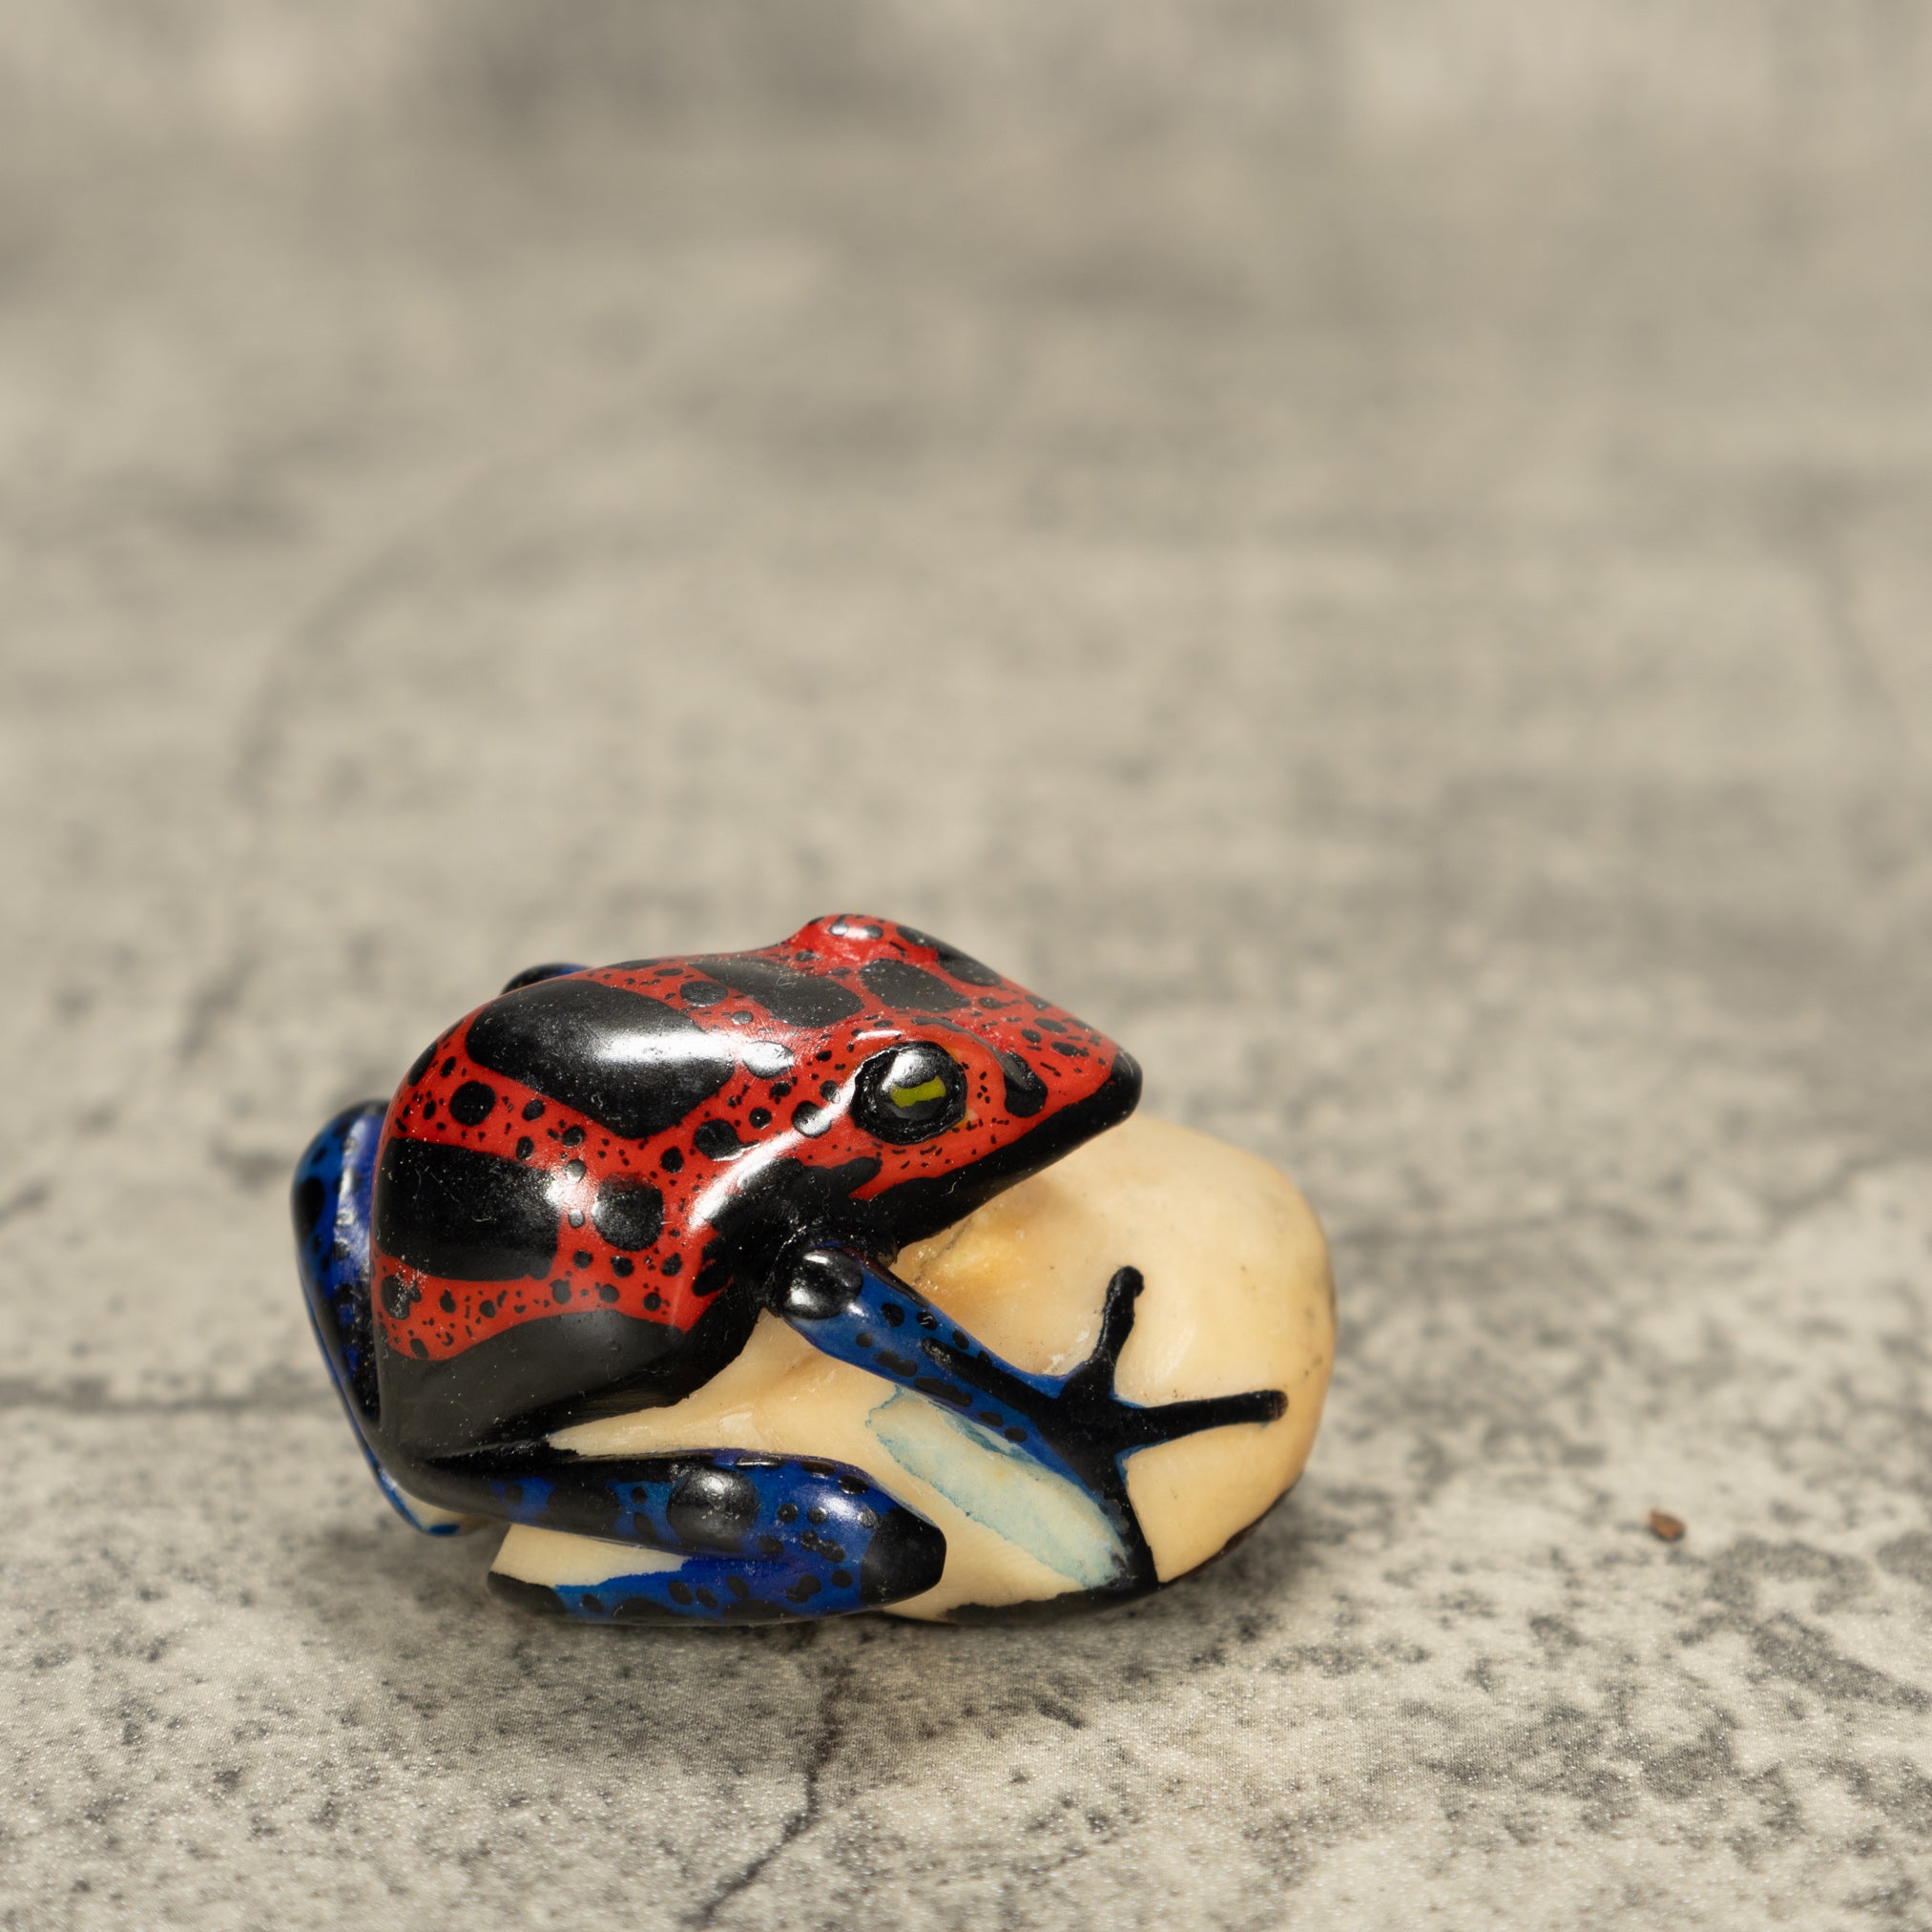 Red And Black Poison Dart Frog Tagua Nut Carving